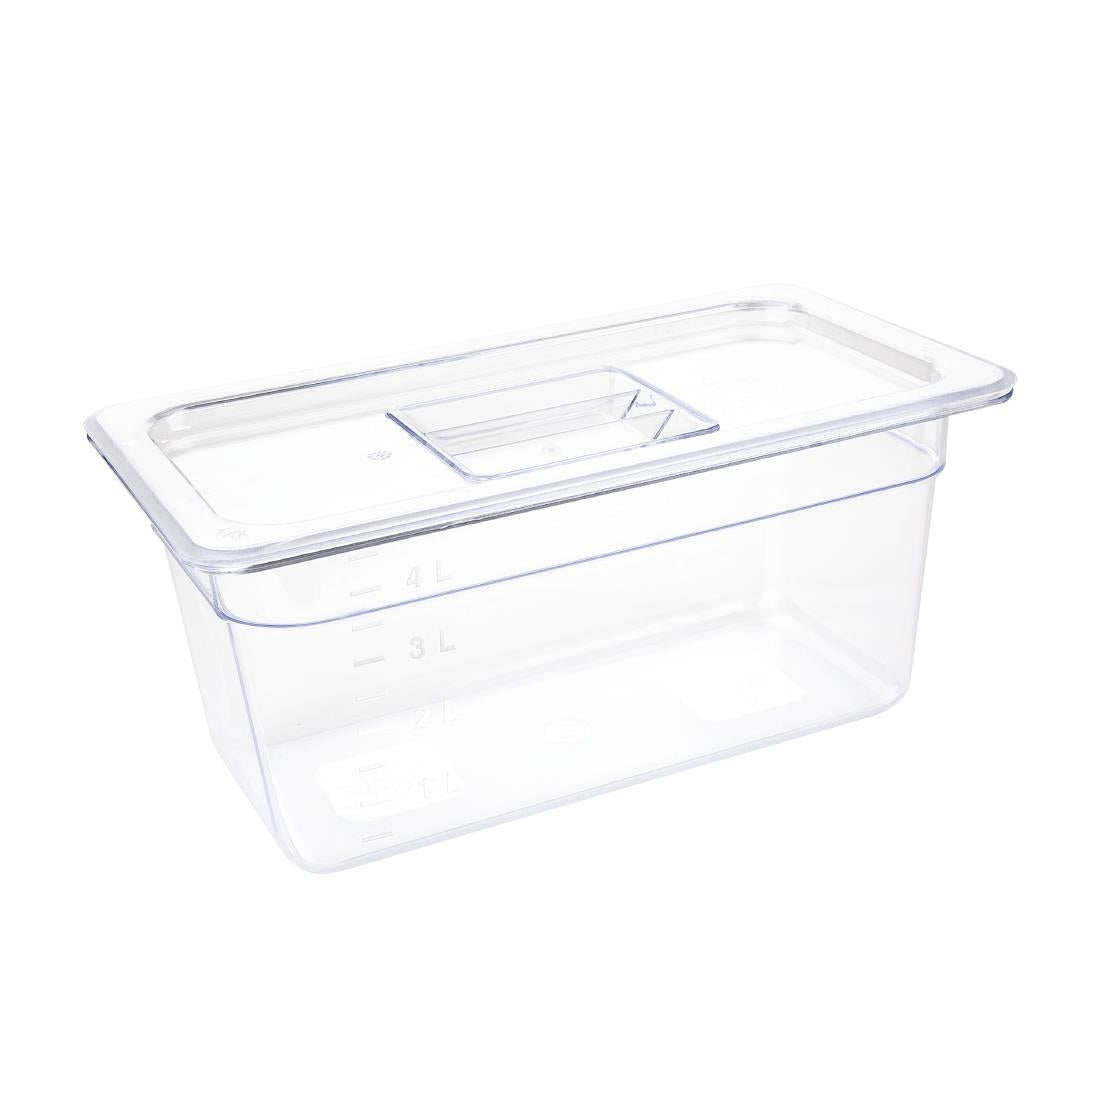 U234 Vogue Polycarbonate 1/3 Gastronorm Container 150mm Clear